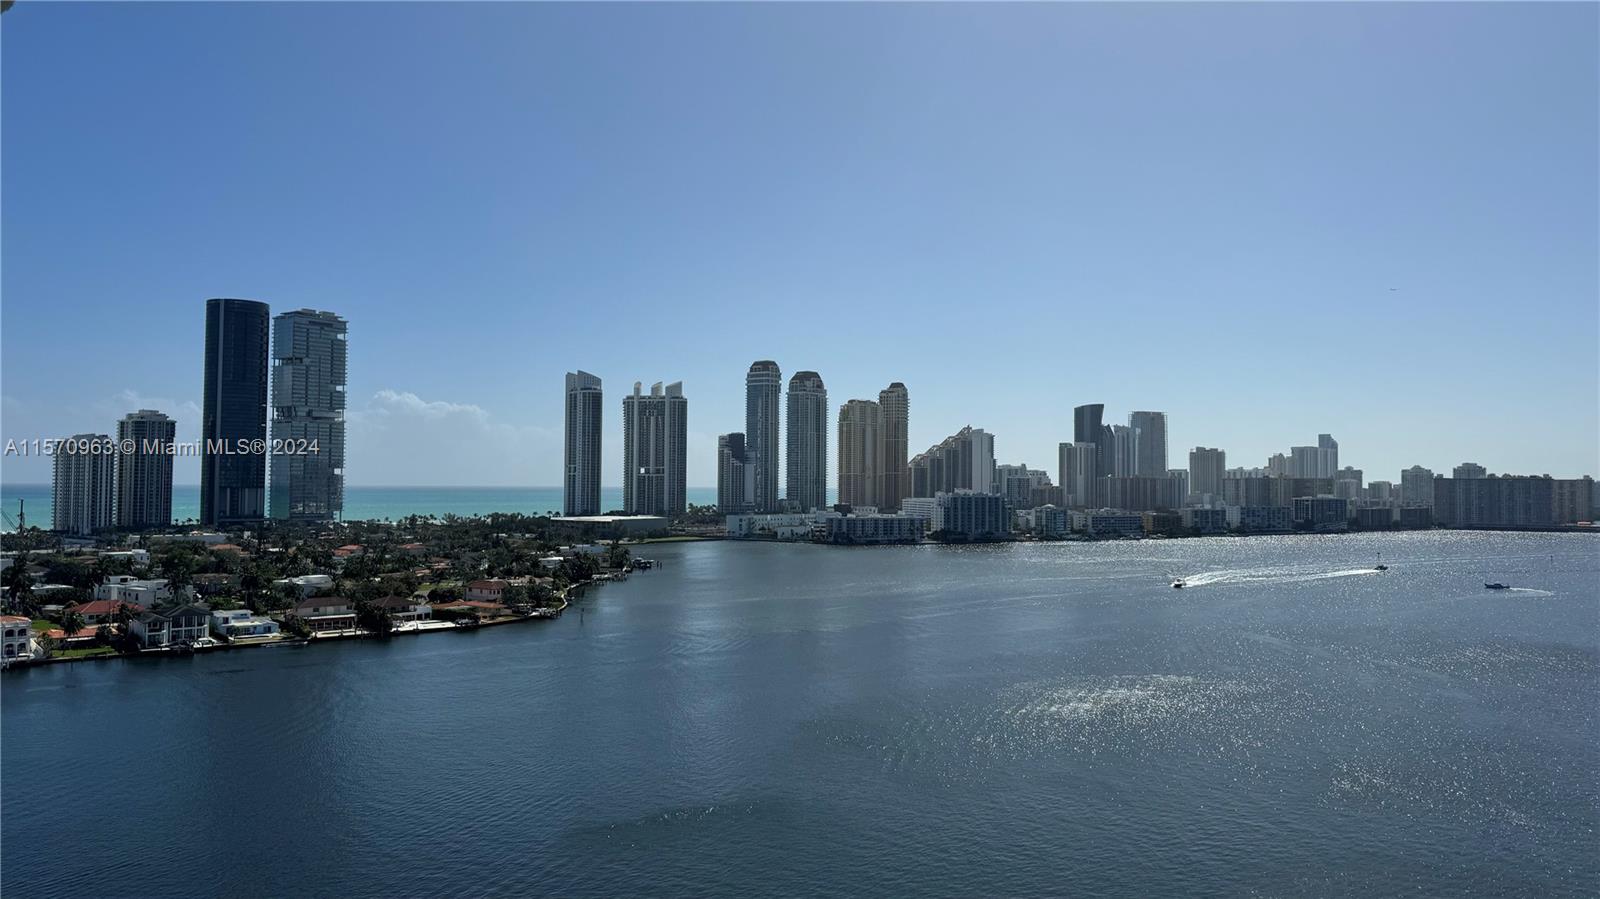 The ULTIMATE Penthouse! Rare opportunity to rent the best unit in the area! UNIQUE VIEWS of the intracoastal and the ocean across Sunny Isles and all South Miami! 2 spacious bedrooms, 2 full bathrooms with shower and tub recently renovated. Exquisite marble floors throughout the unit and wrap around balcony! Tasteful tile floor on the living room and master bedroom! Brand new stainless steel appliances with washer and dryer. Comes with 3 assigned parking spots one of which is covered Association includes cable, internet, water, trash, sewage. Tenant pays only for electricity. Unit comes with assigned storage! Comes furnished but furniture can be removed if needed. Couches can be converted to beds for additional sleeping capacity. Walk in closets with custom made cabinetry.